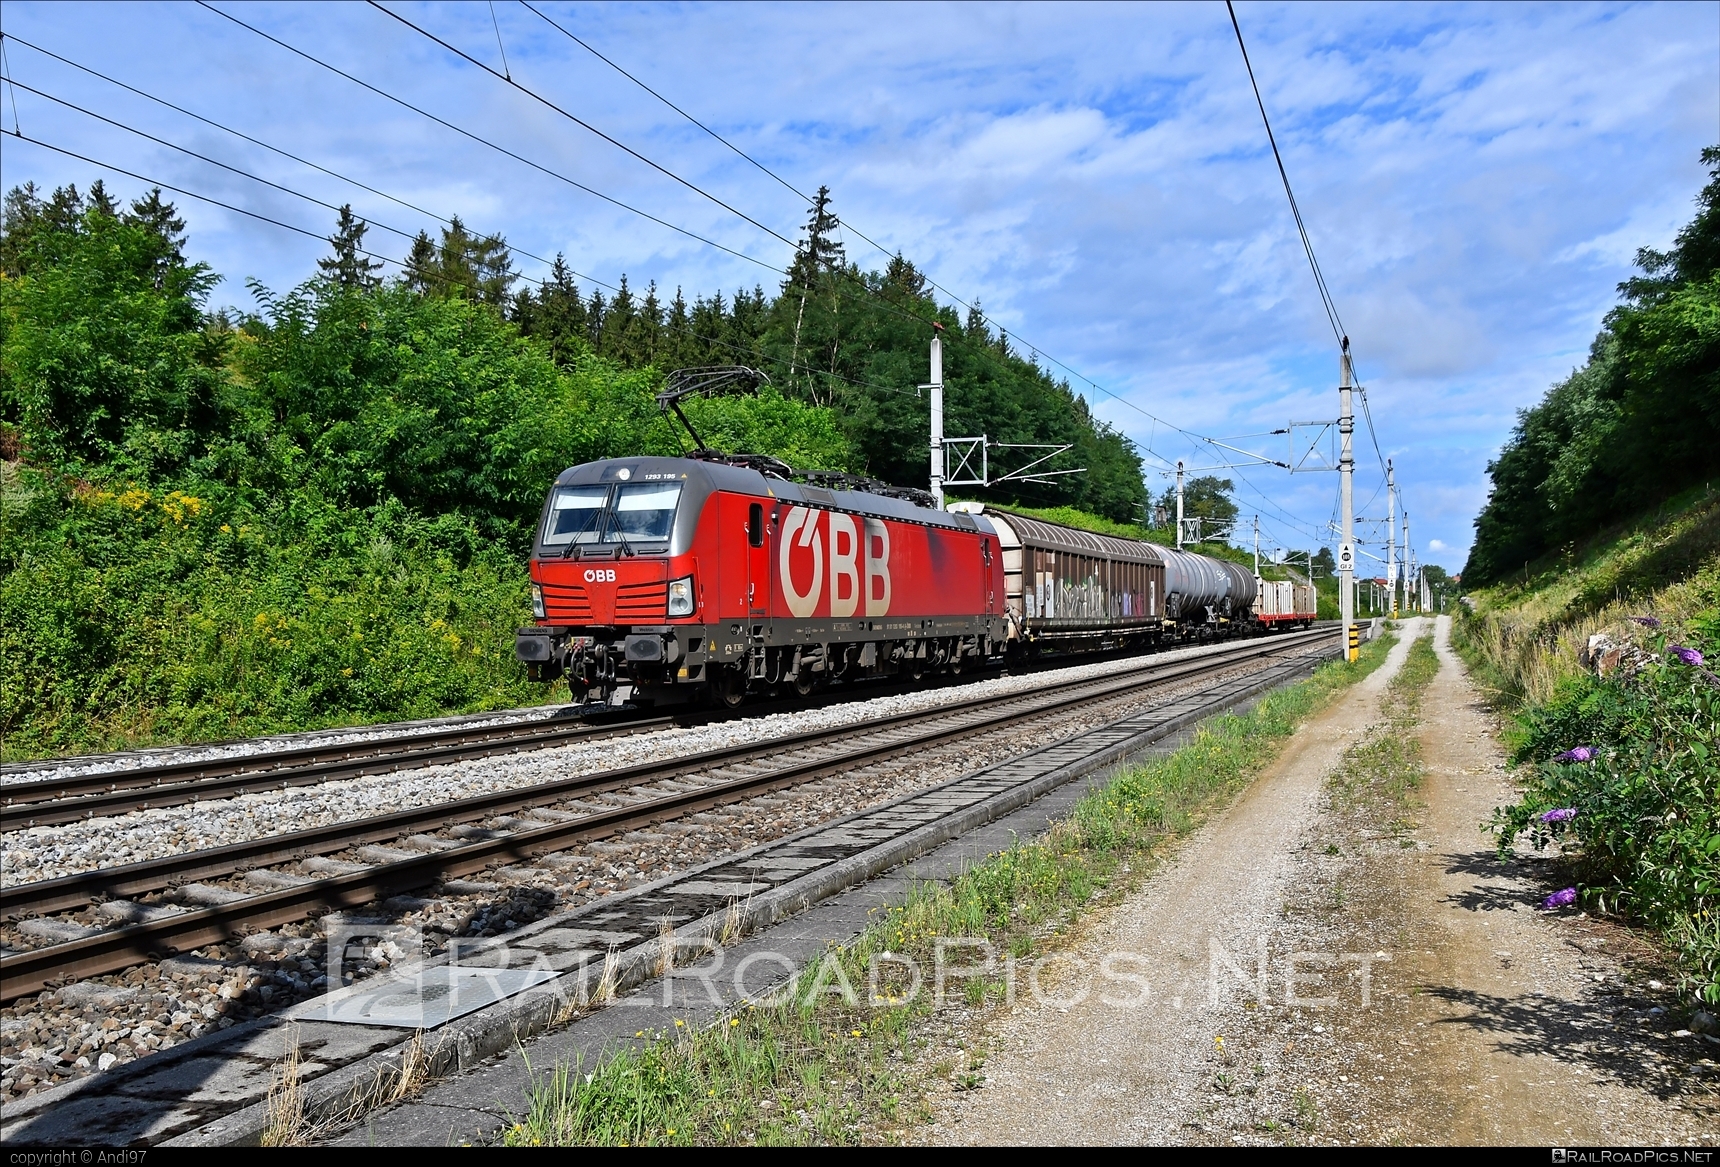 Siemens Vectron MS - 1293 195 operated by Rail Cargo Austria AG #mixofcargo #obb #osterreichischebundesbahnen #rcw #siemens #siemensVectron #siemensVectronMS #vectron #vectronMS